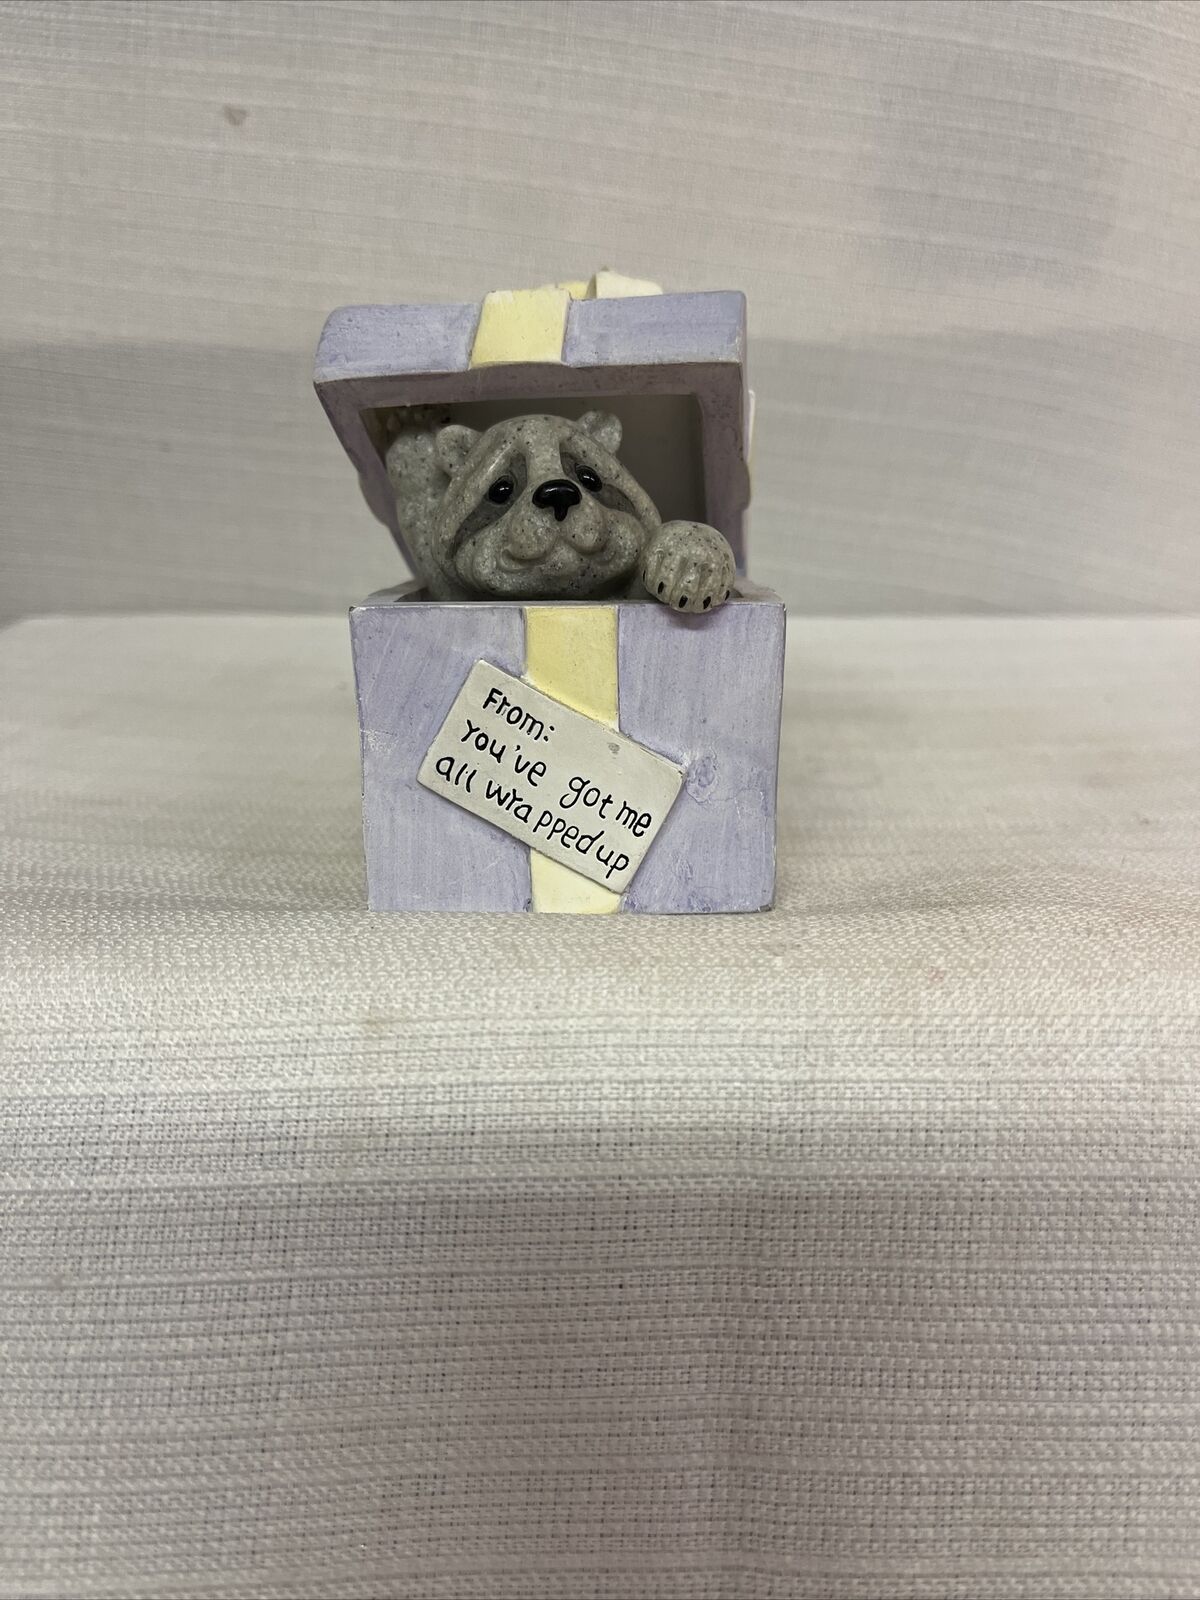 Quarry Critters Raccoon Popping Out Of Box “From: You’ve Got Me All Wrapped Up”